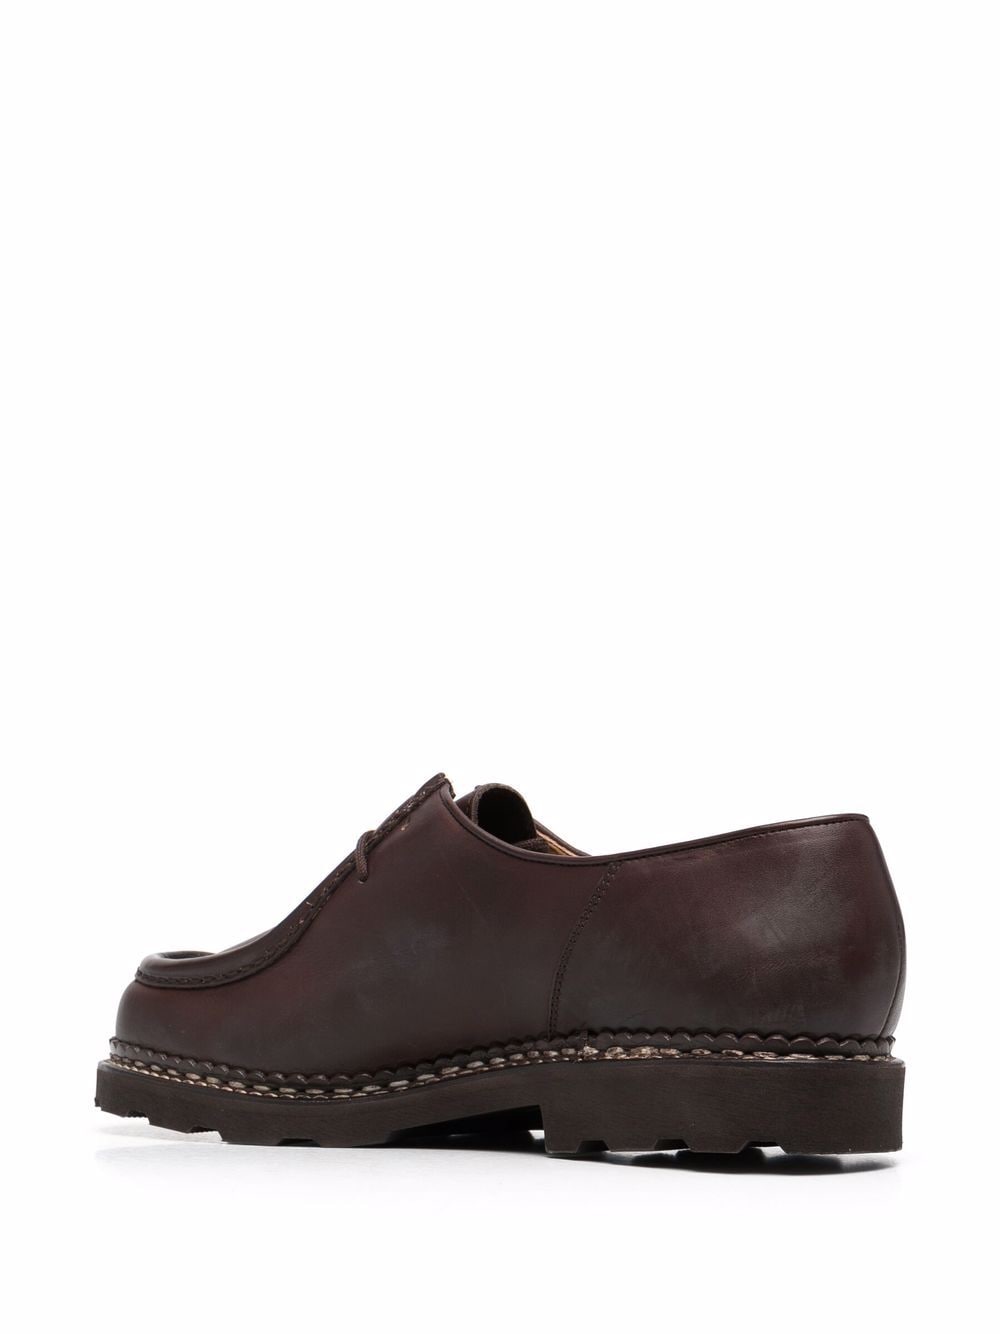 Cafe brown leather Michael leather lace-up shoes